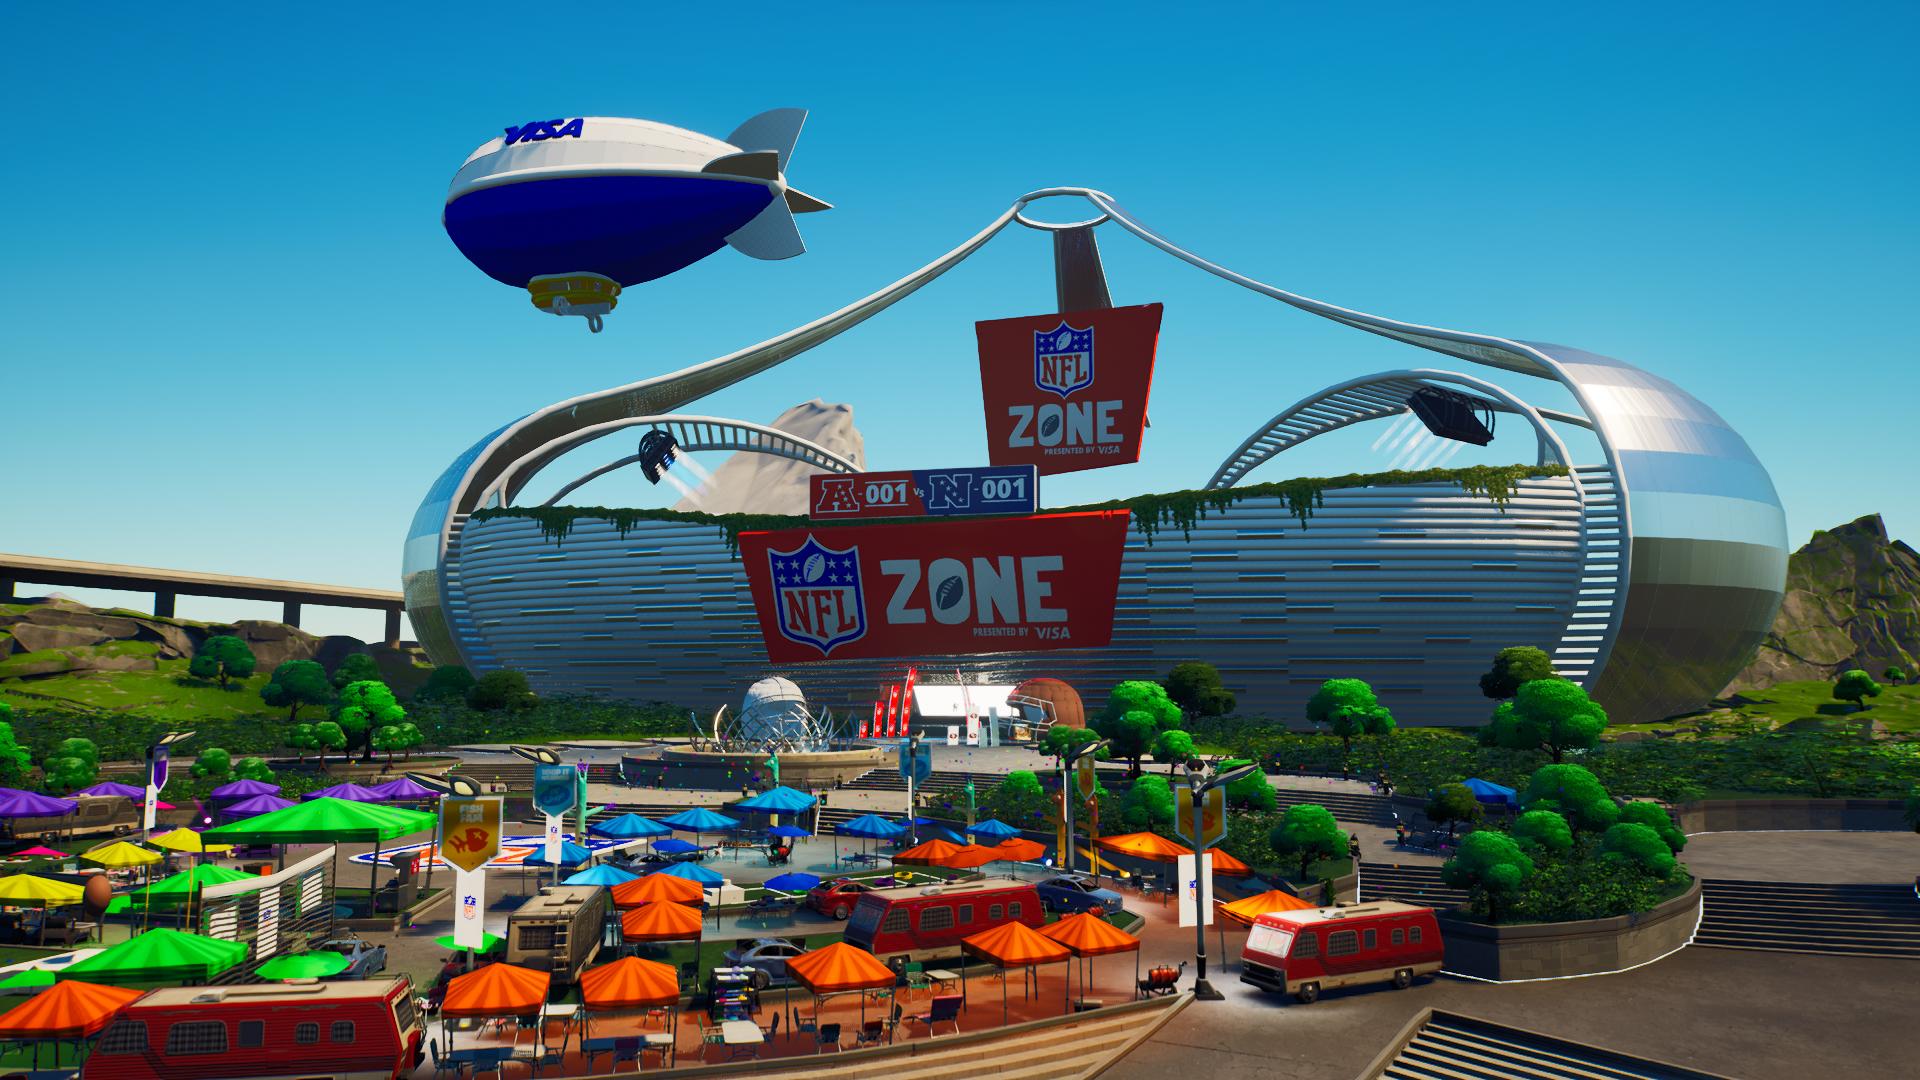 Fortnite and the NFL hope NFL Zone attracts young fans to football - The  Washington Post